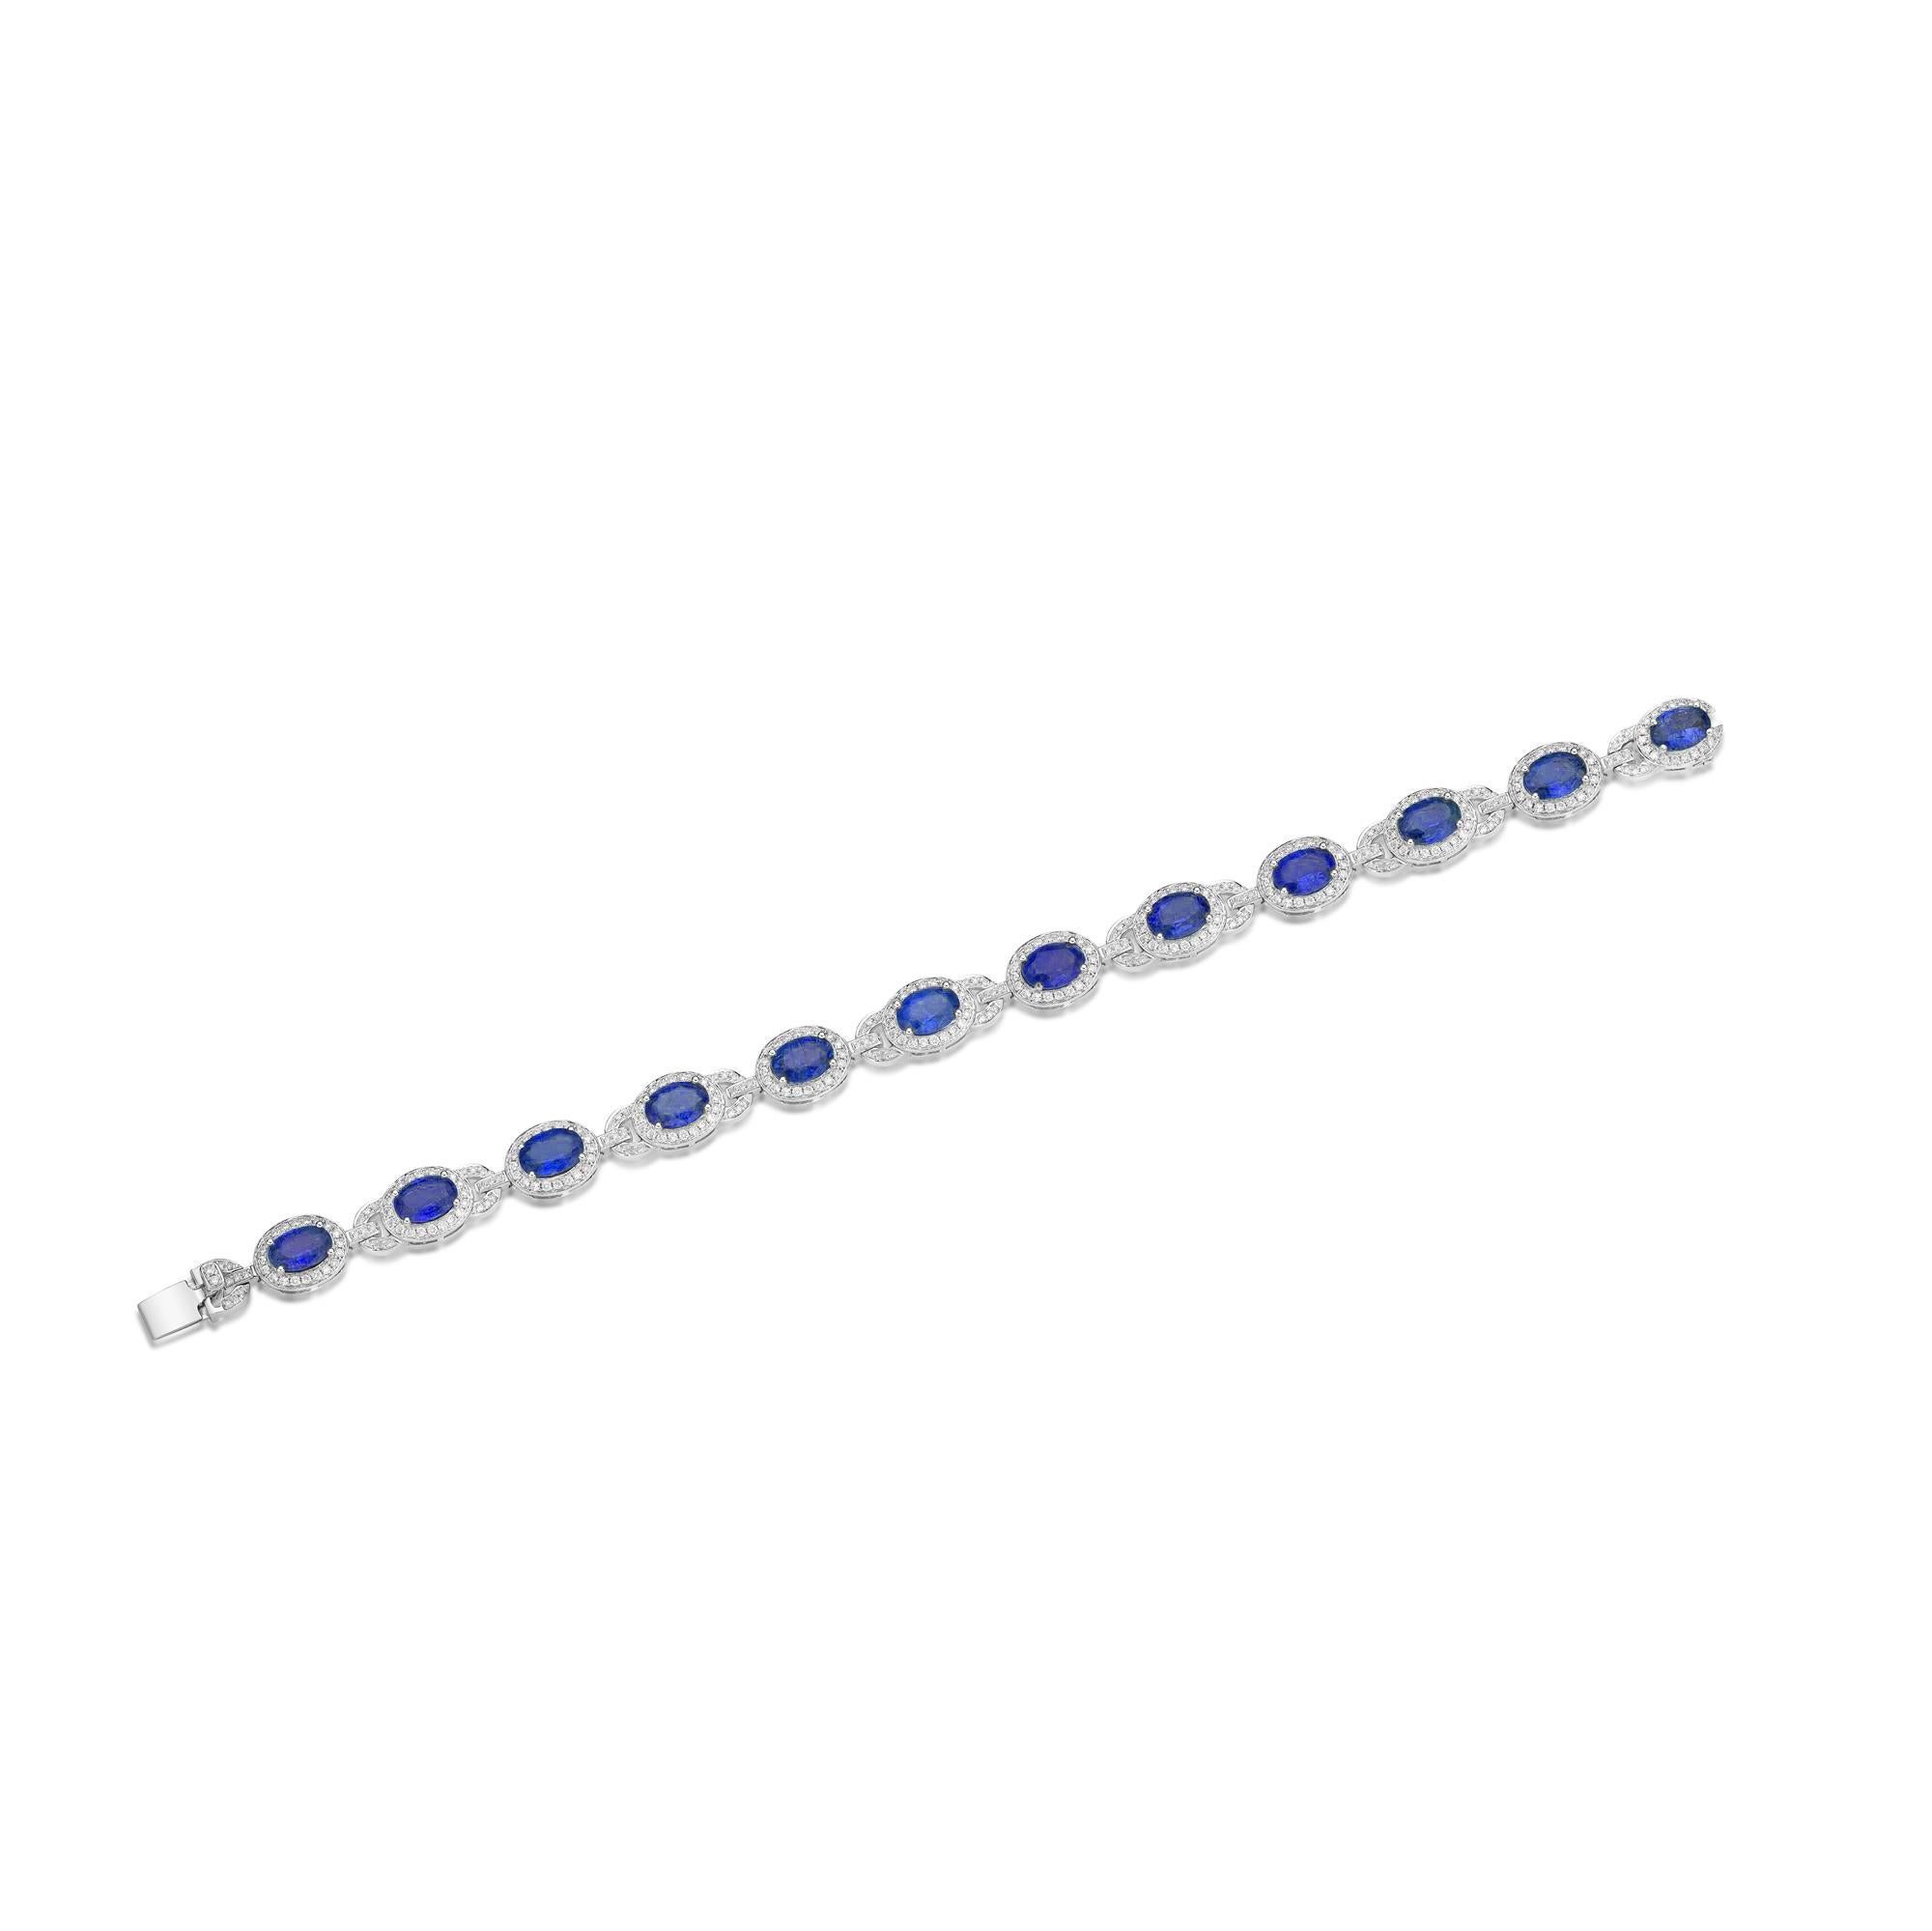 Nigaam 7.24 Cts. Blue Sapphire Halo Diamond Link Bracelet in 18k White Gold In New Condition For Sale In New York, NY